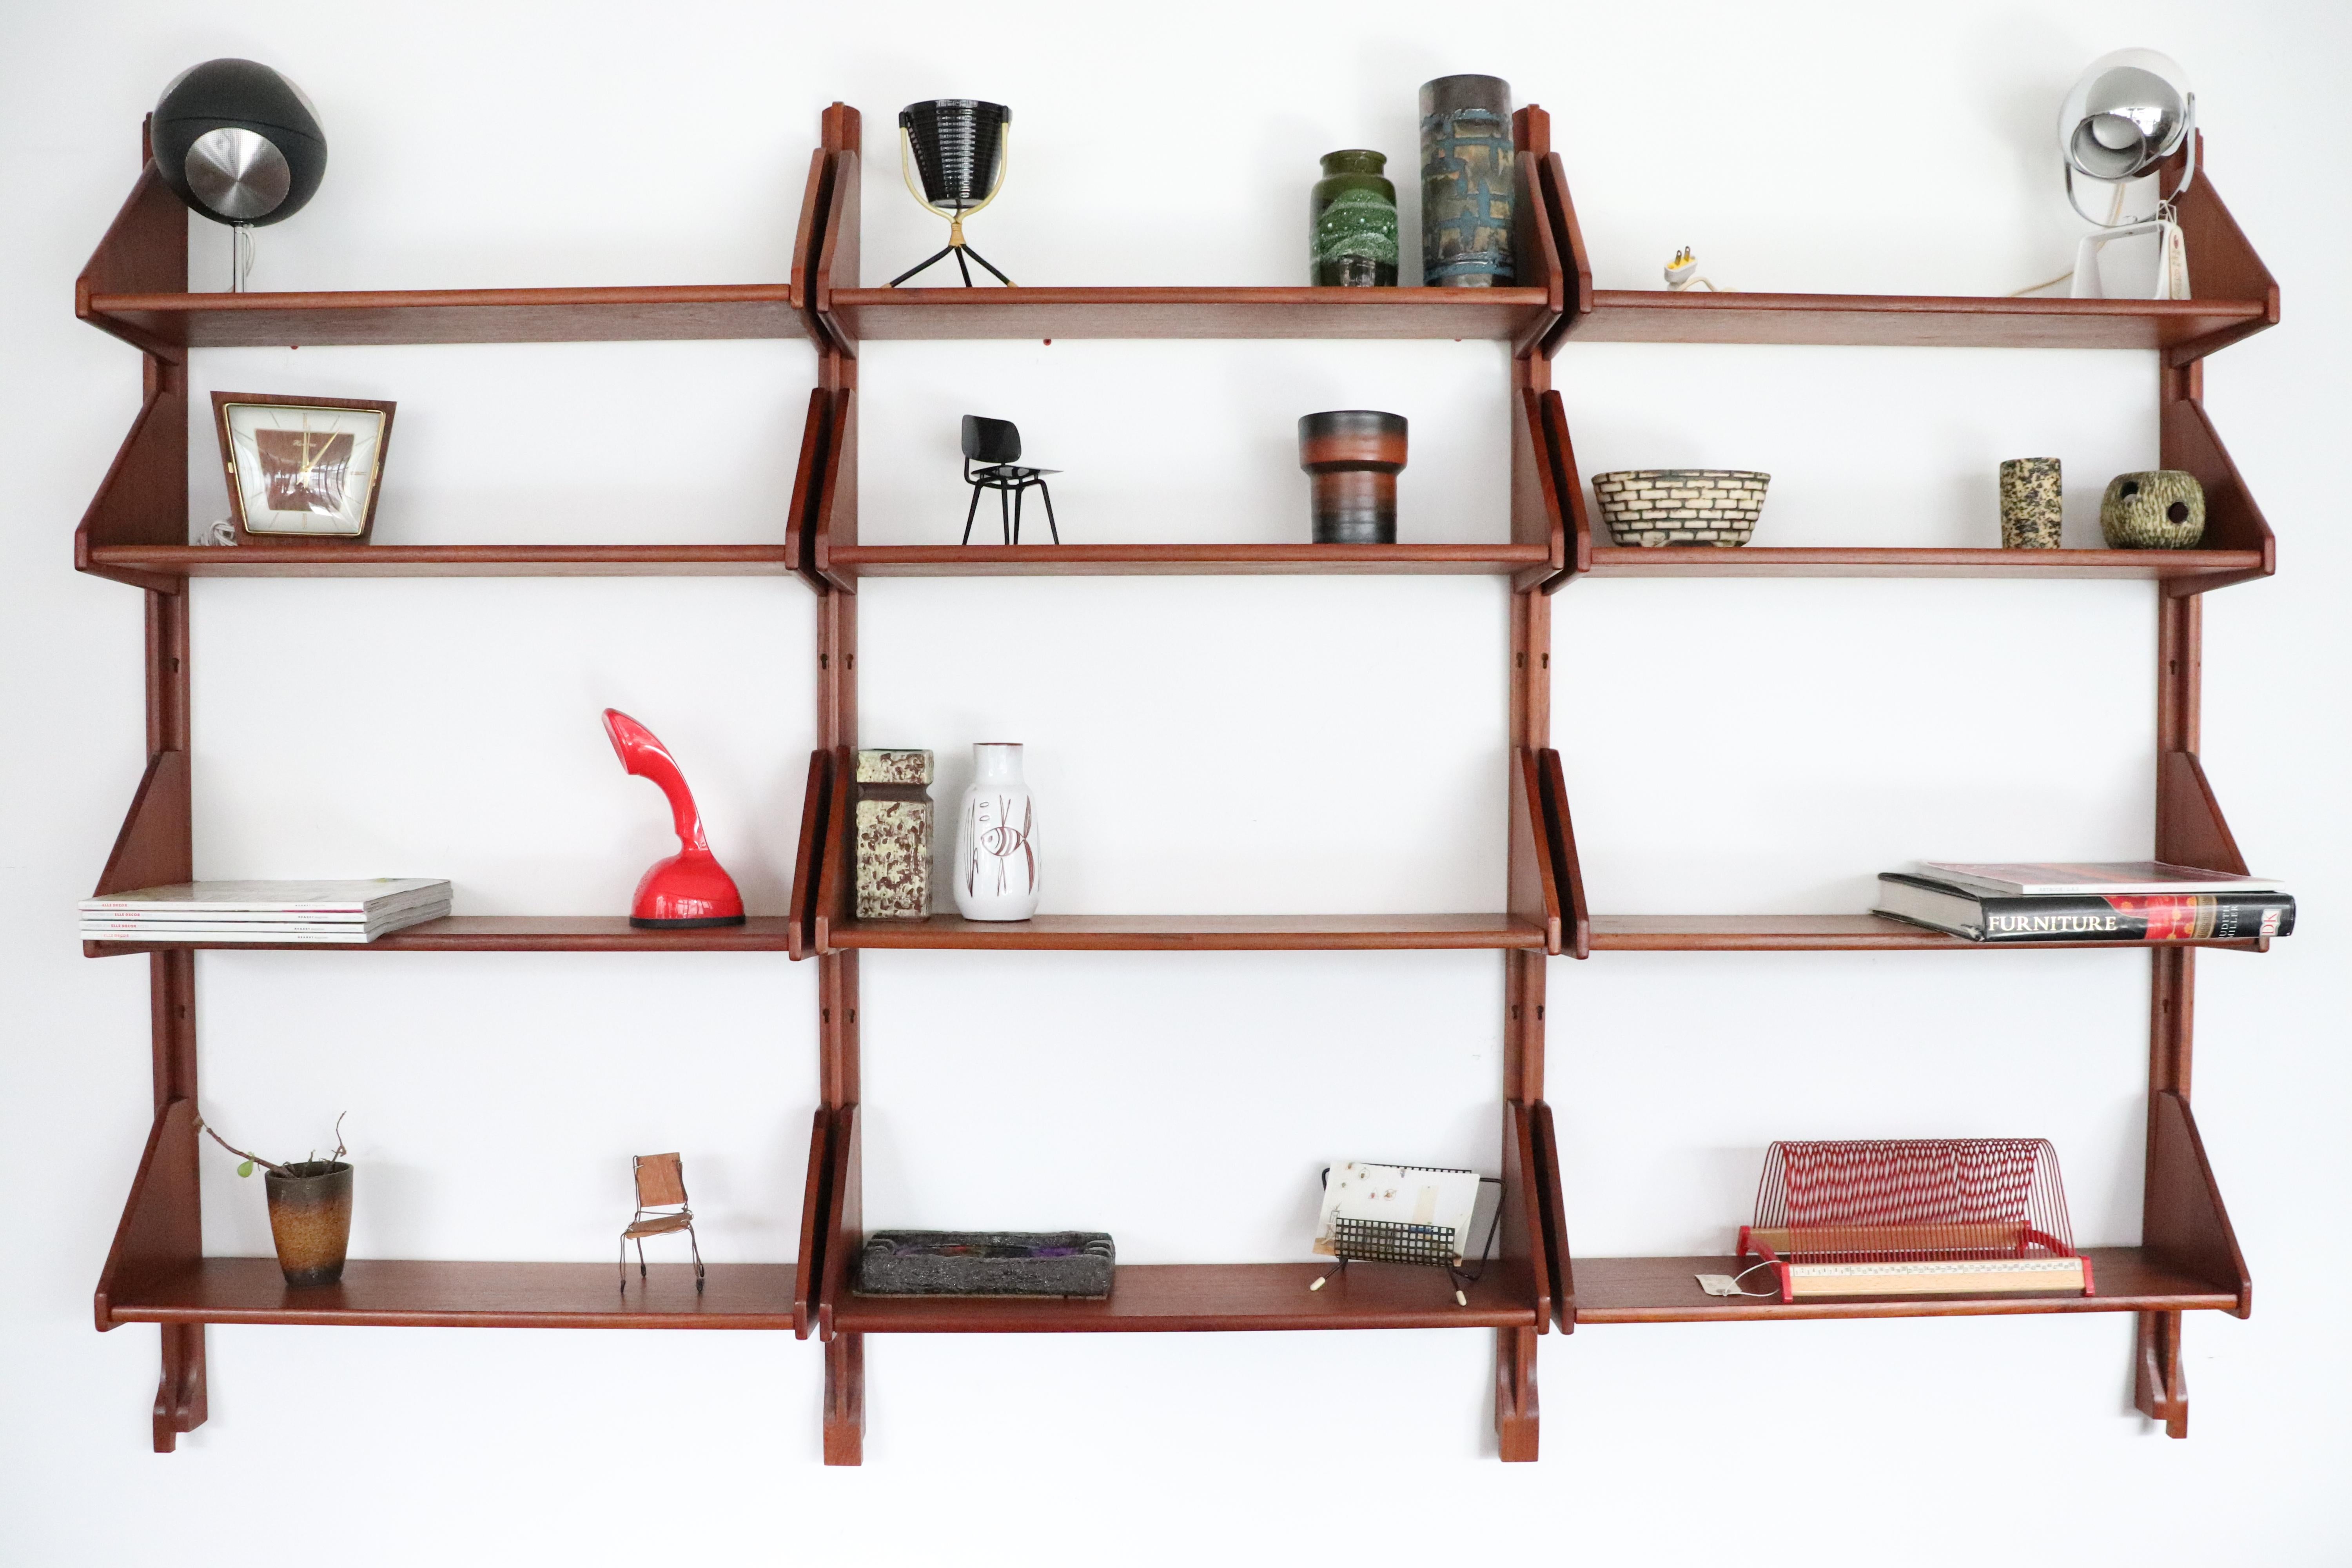 Handsome Danish teak wall mount shelving unit with all wood risers and shelves. Very nice original condition. Accessories, as pictured, not included.